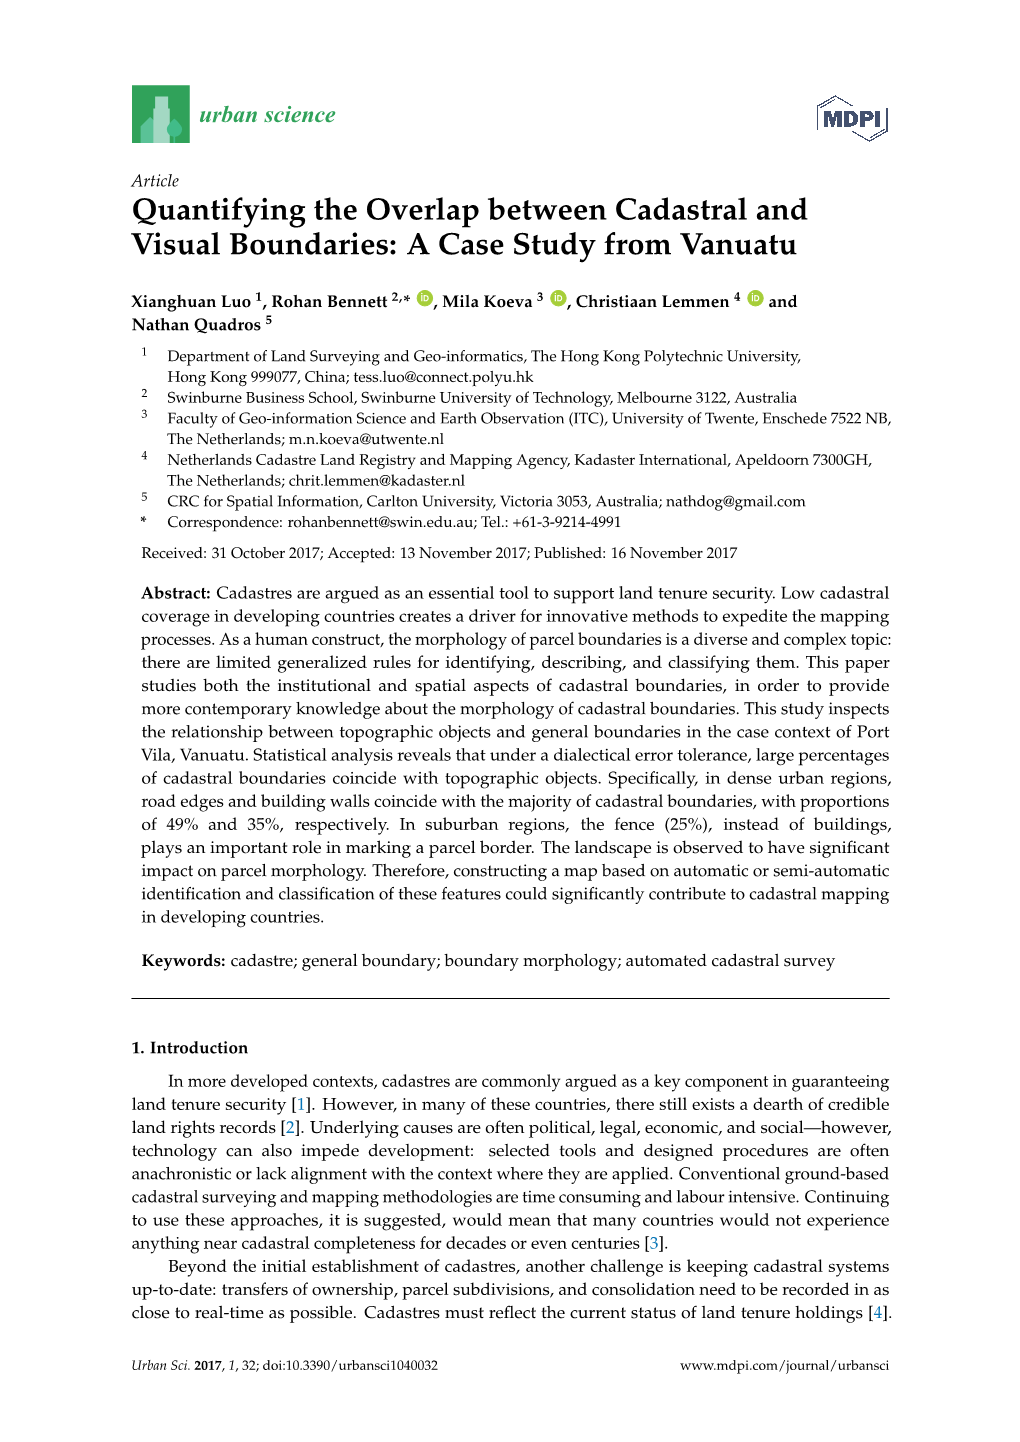 Quantifying the Overlap Between Cadastral and Visual Boundaries: a Case Study from Vanuatu